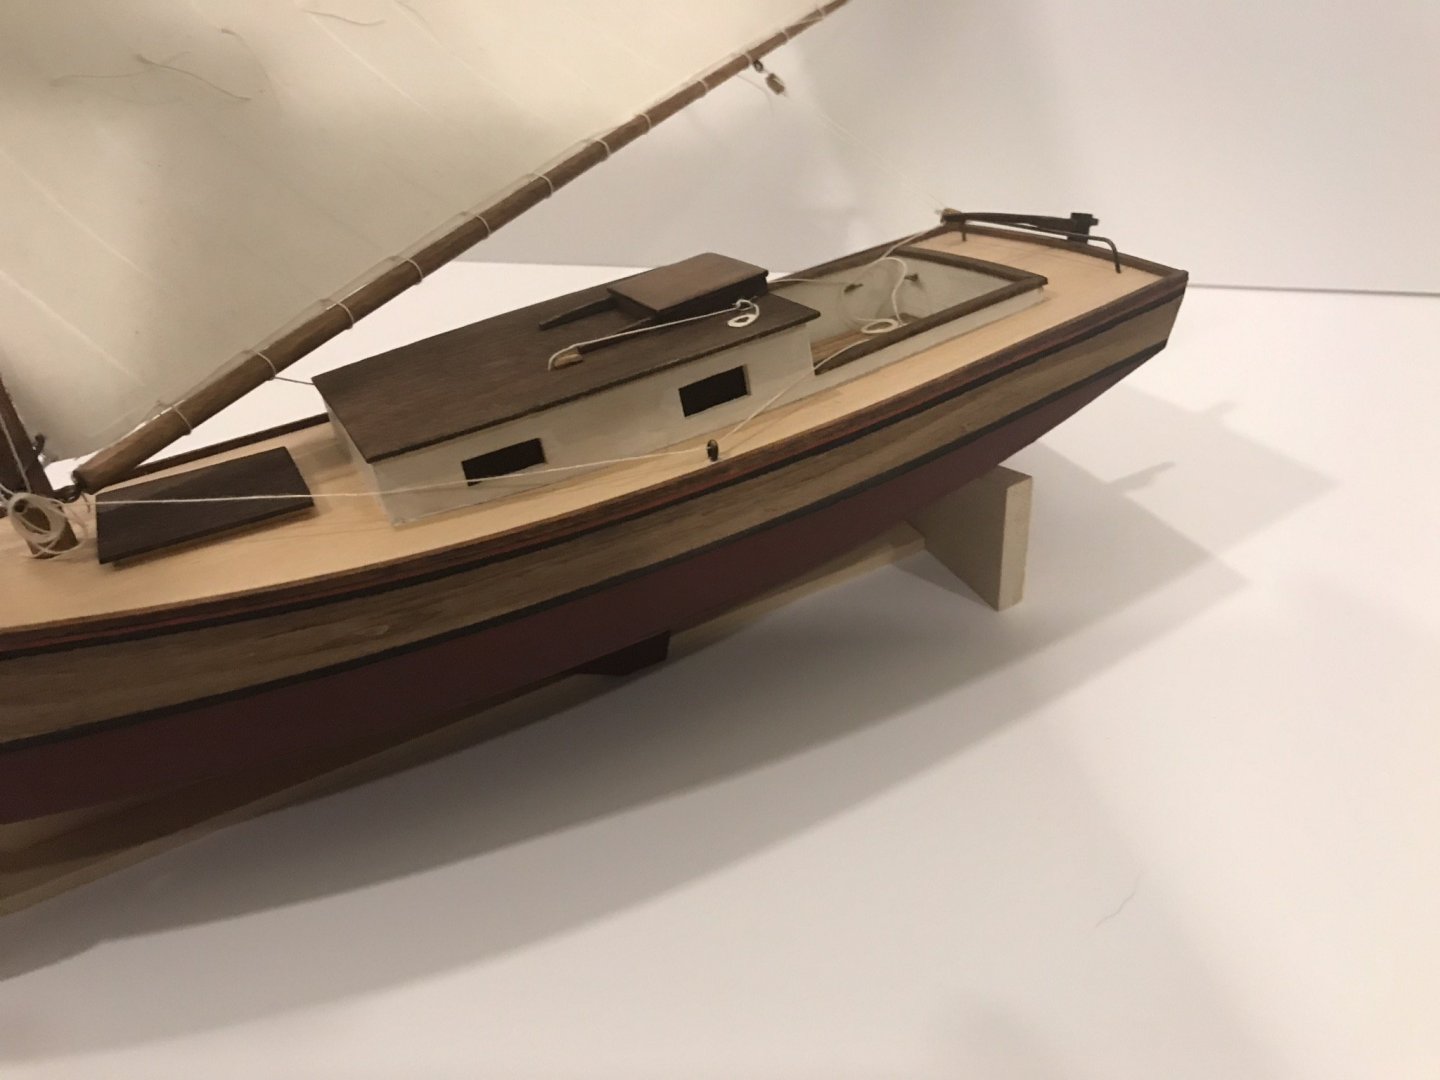 midwest model yachts